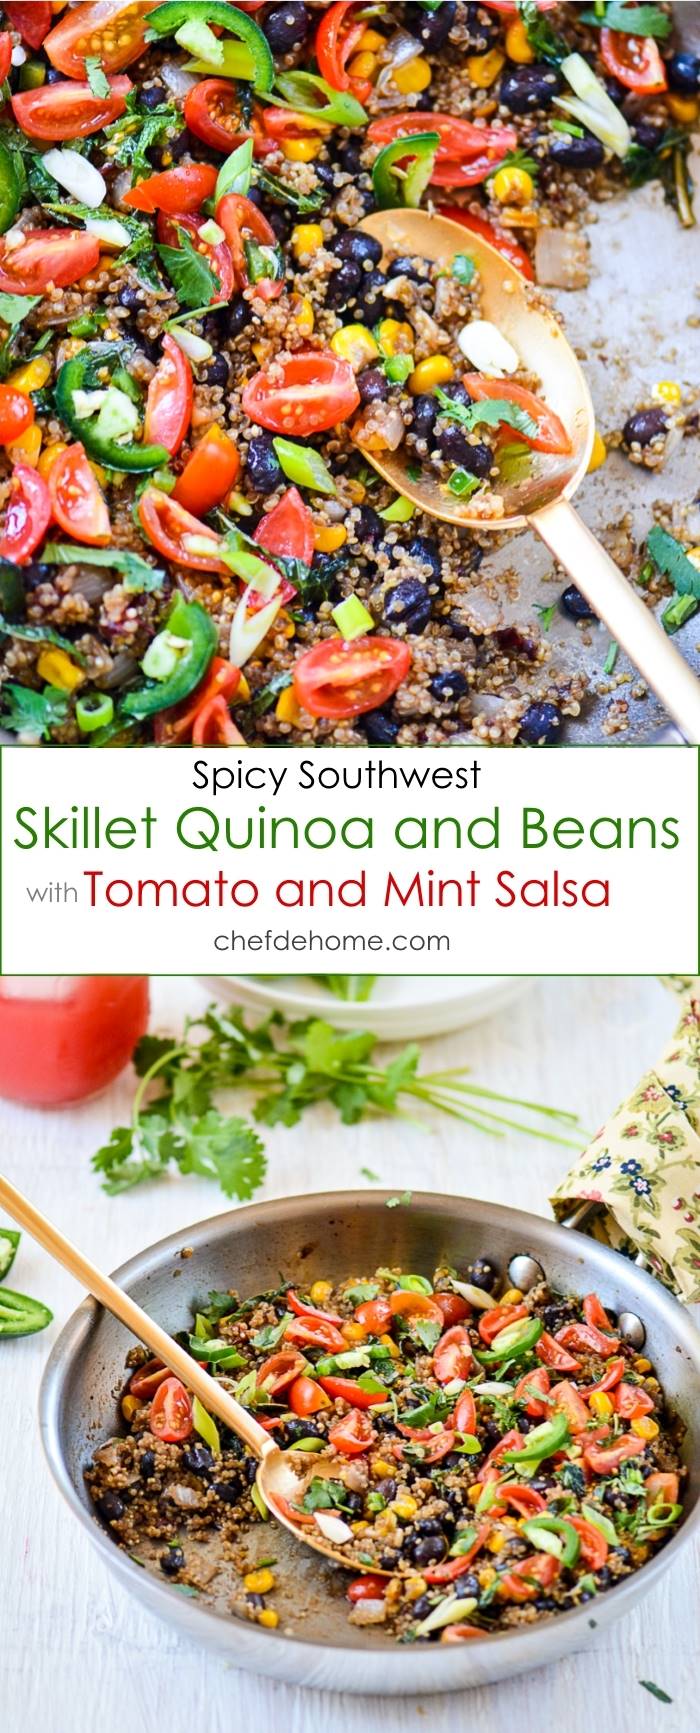 Mexican Quinoa and Beans Skillet with Zesty Mint and Tomato Salsa for quick and easy Weekday Dinner | chefdehome.com 